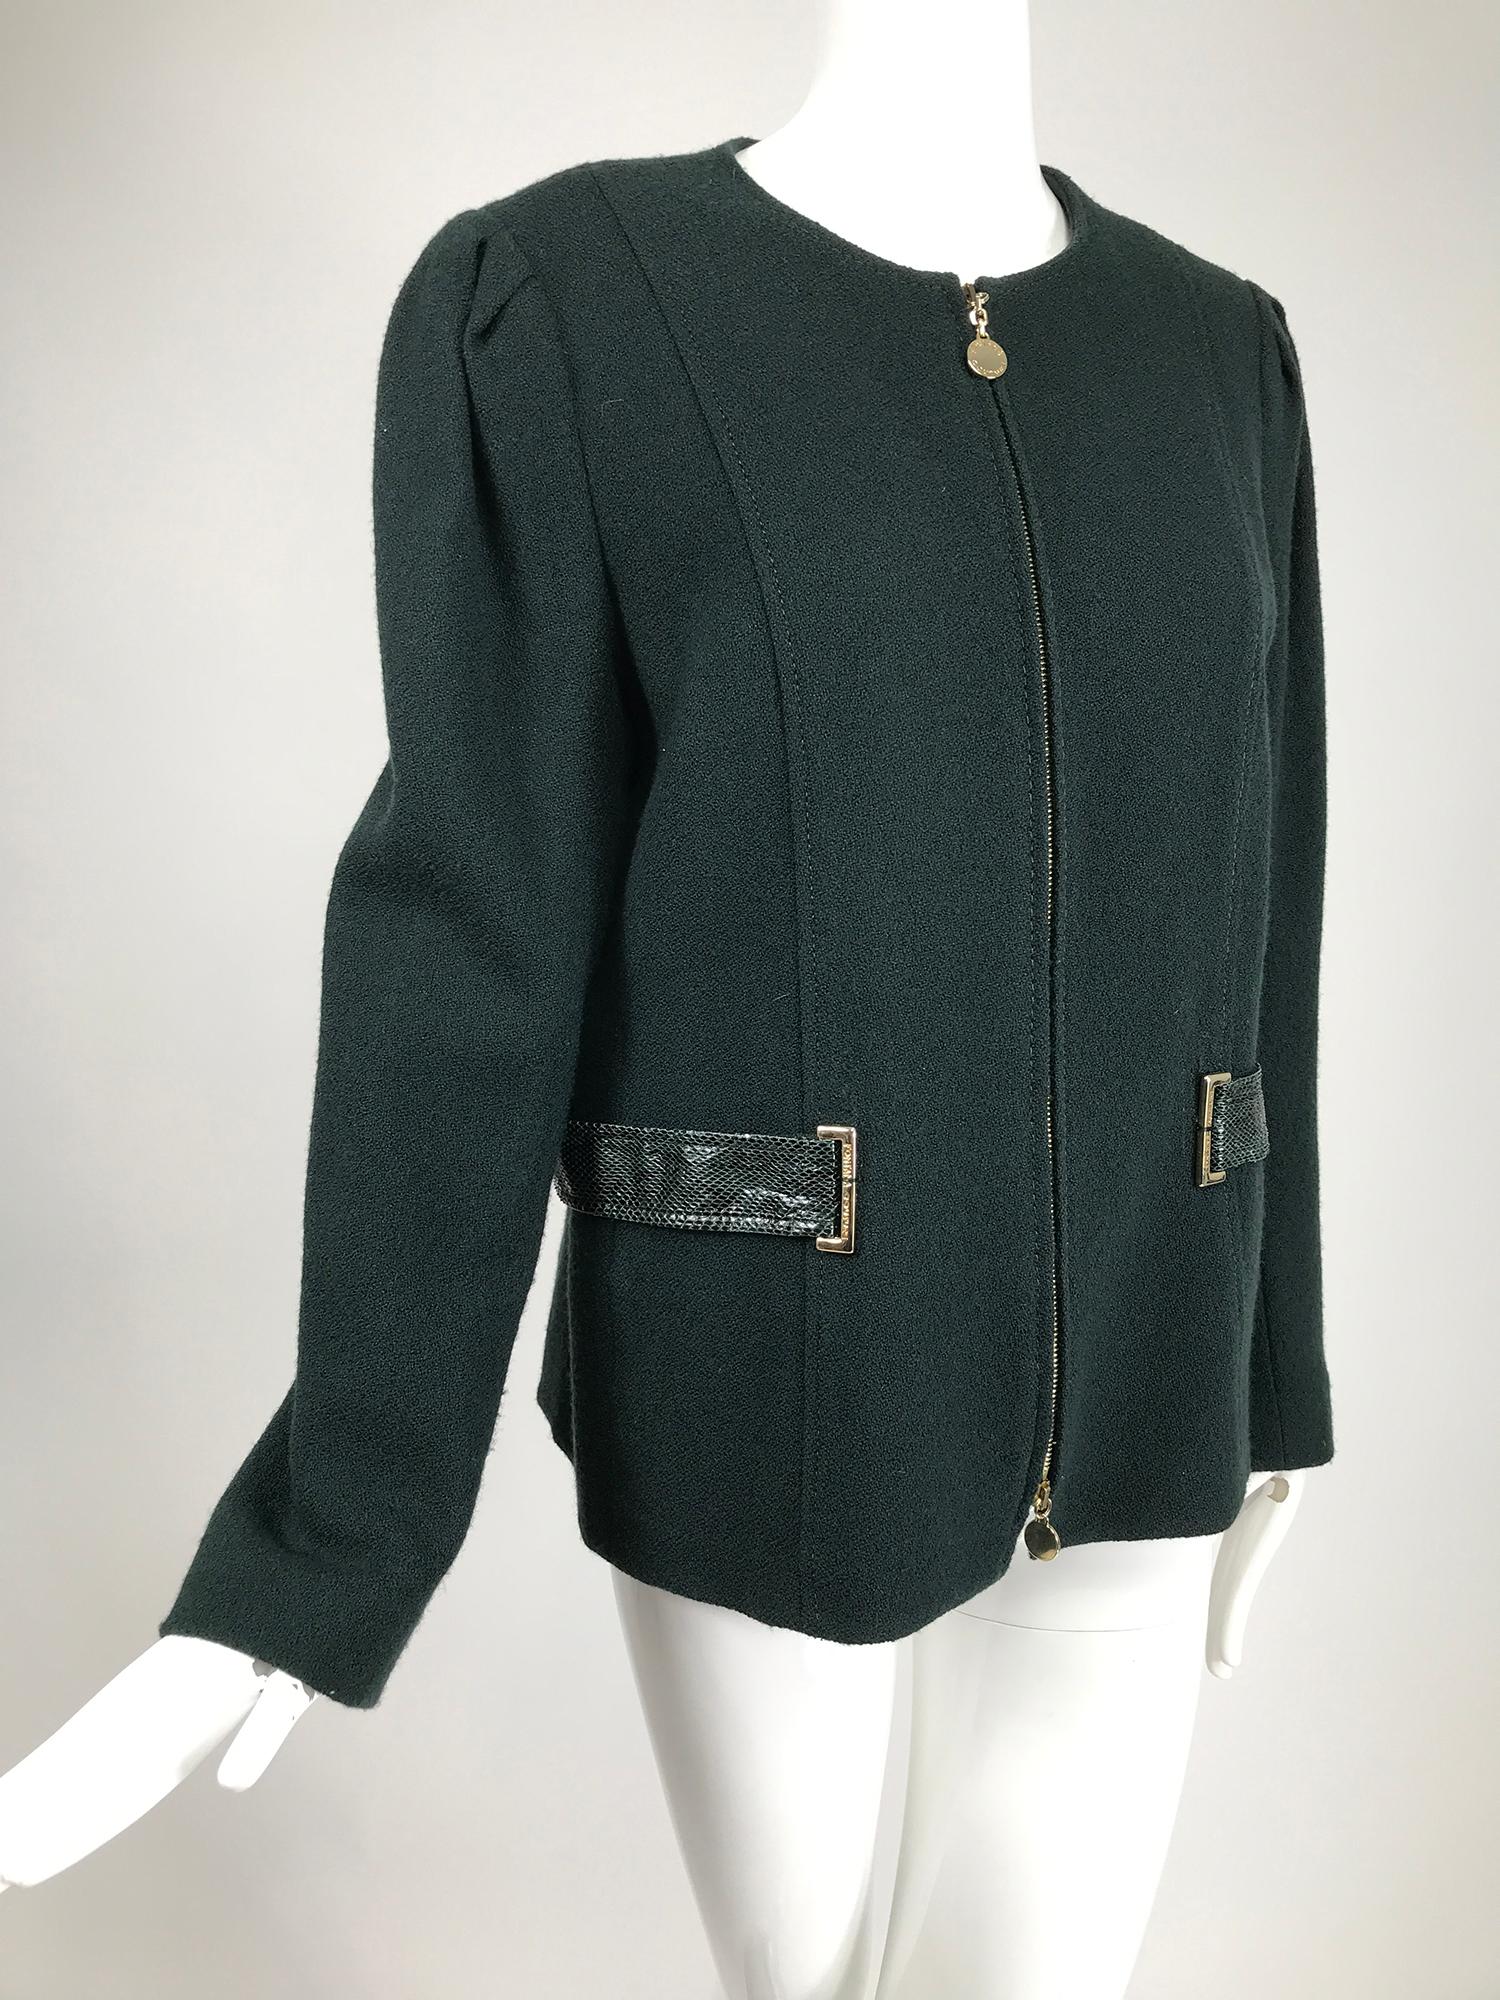 Fontana Couture Milano, dark forest green wool zipper front jacket size 48EU. Jewel neckline, princess seam long sleeve jacket with slightly gathered shoulder tops. Gold hardware separating zipper. At each waist side are 1/2 belts of green snakeskin